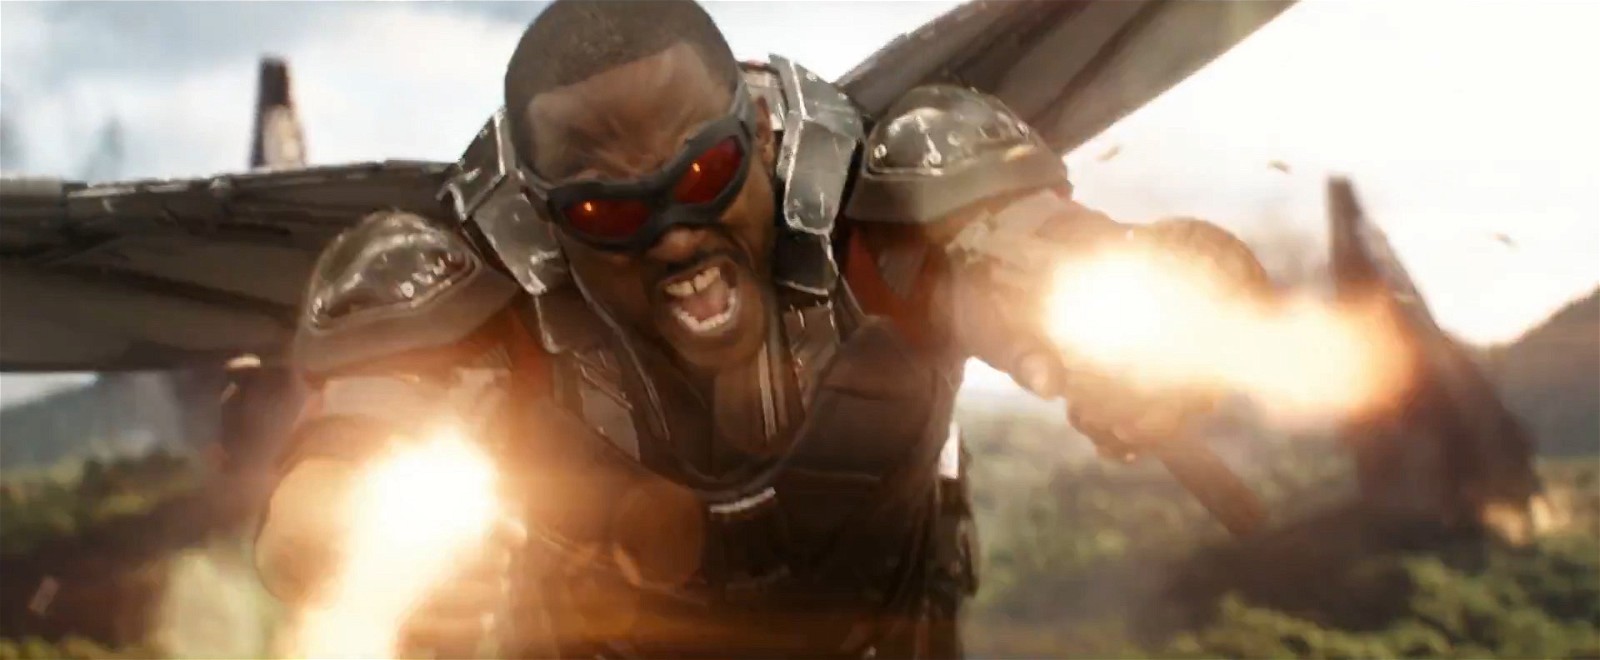 Anthony Mackie as Falcon in the MCU